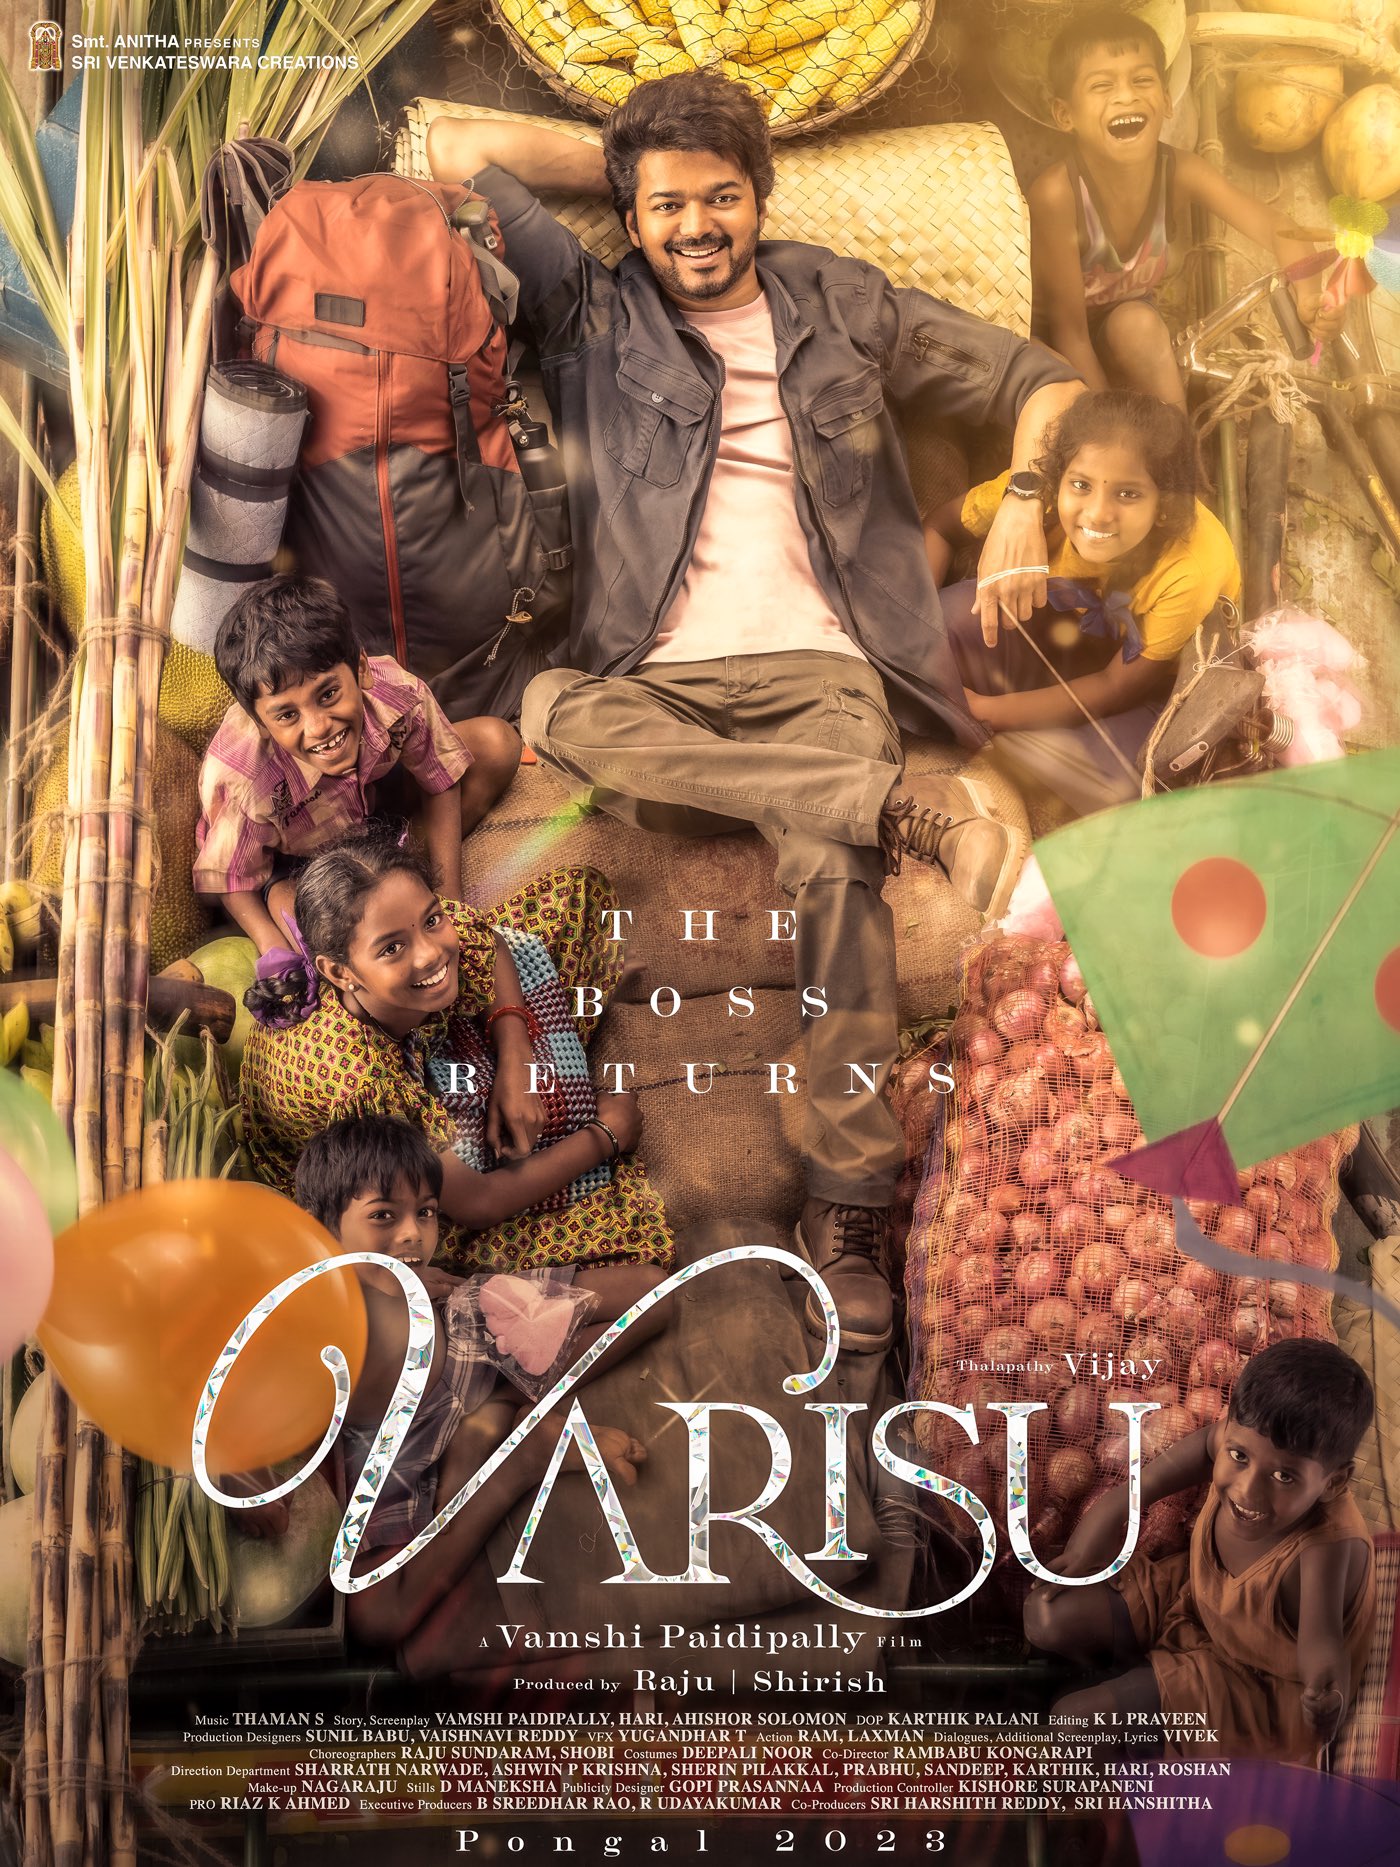 Does varisu first look is copied from otto ad poster